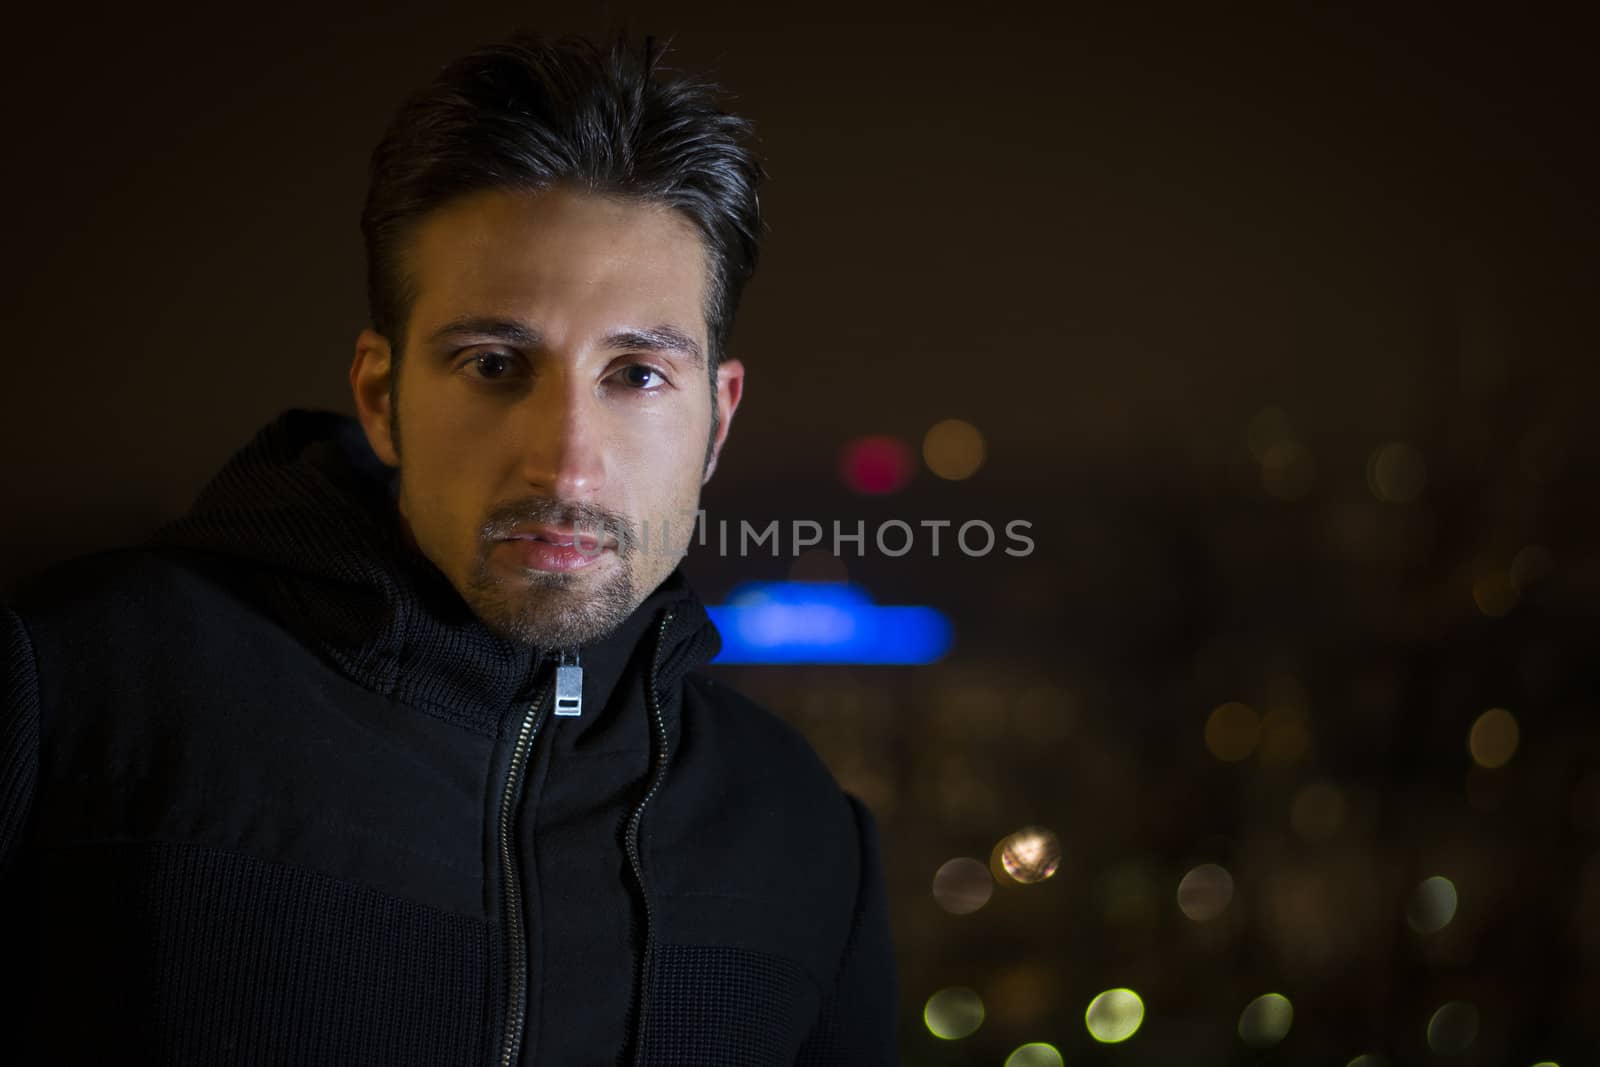 Attractive young man portrait at night with city lights behind him, looking at camera